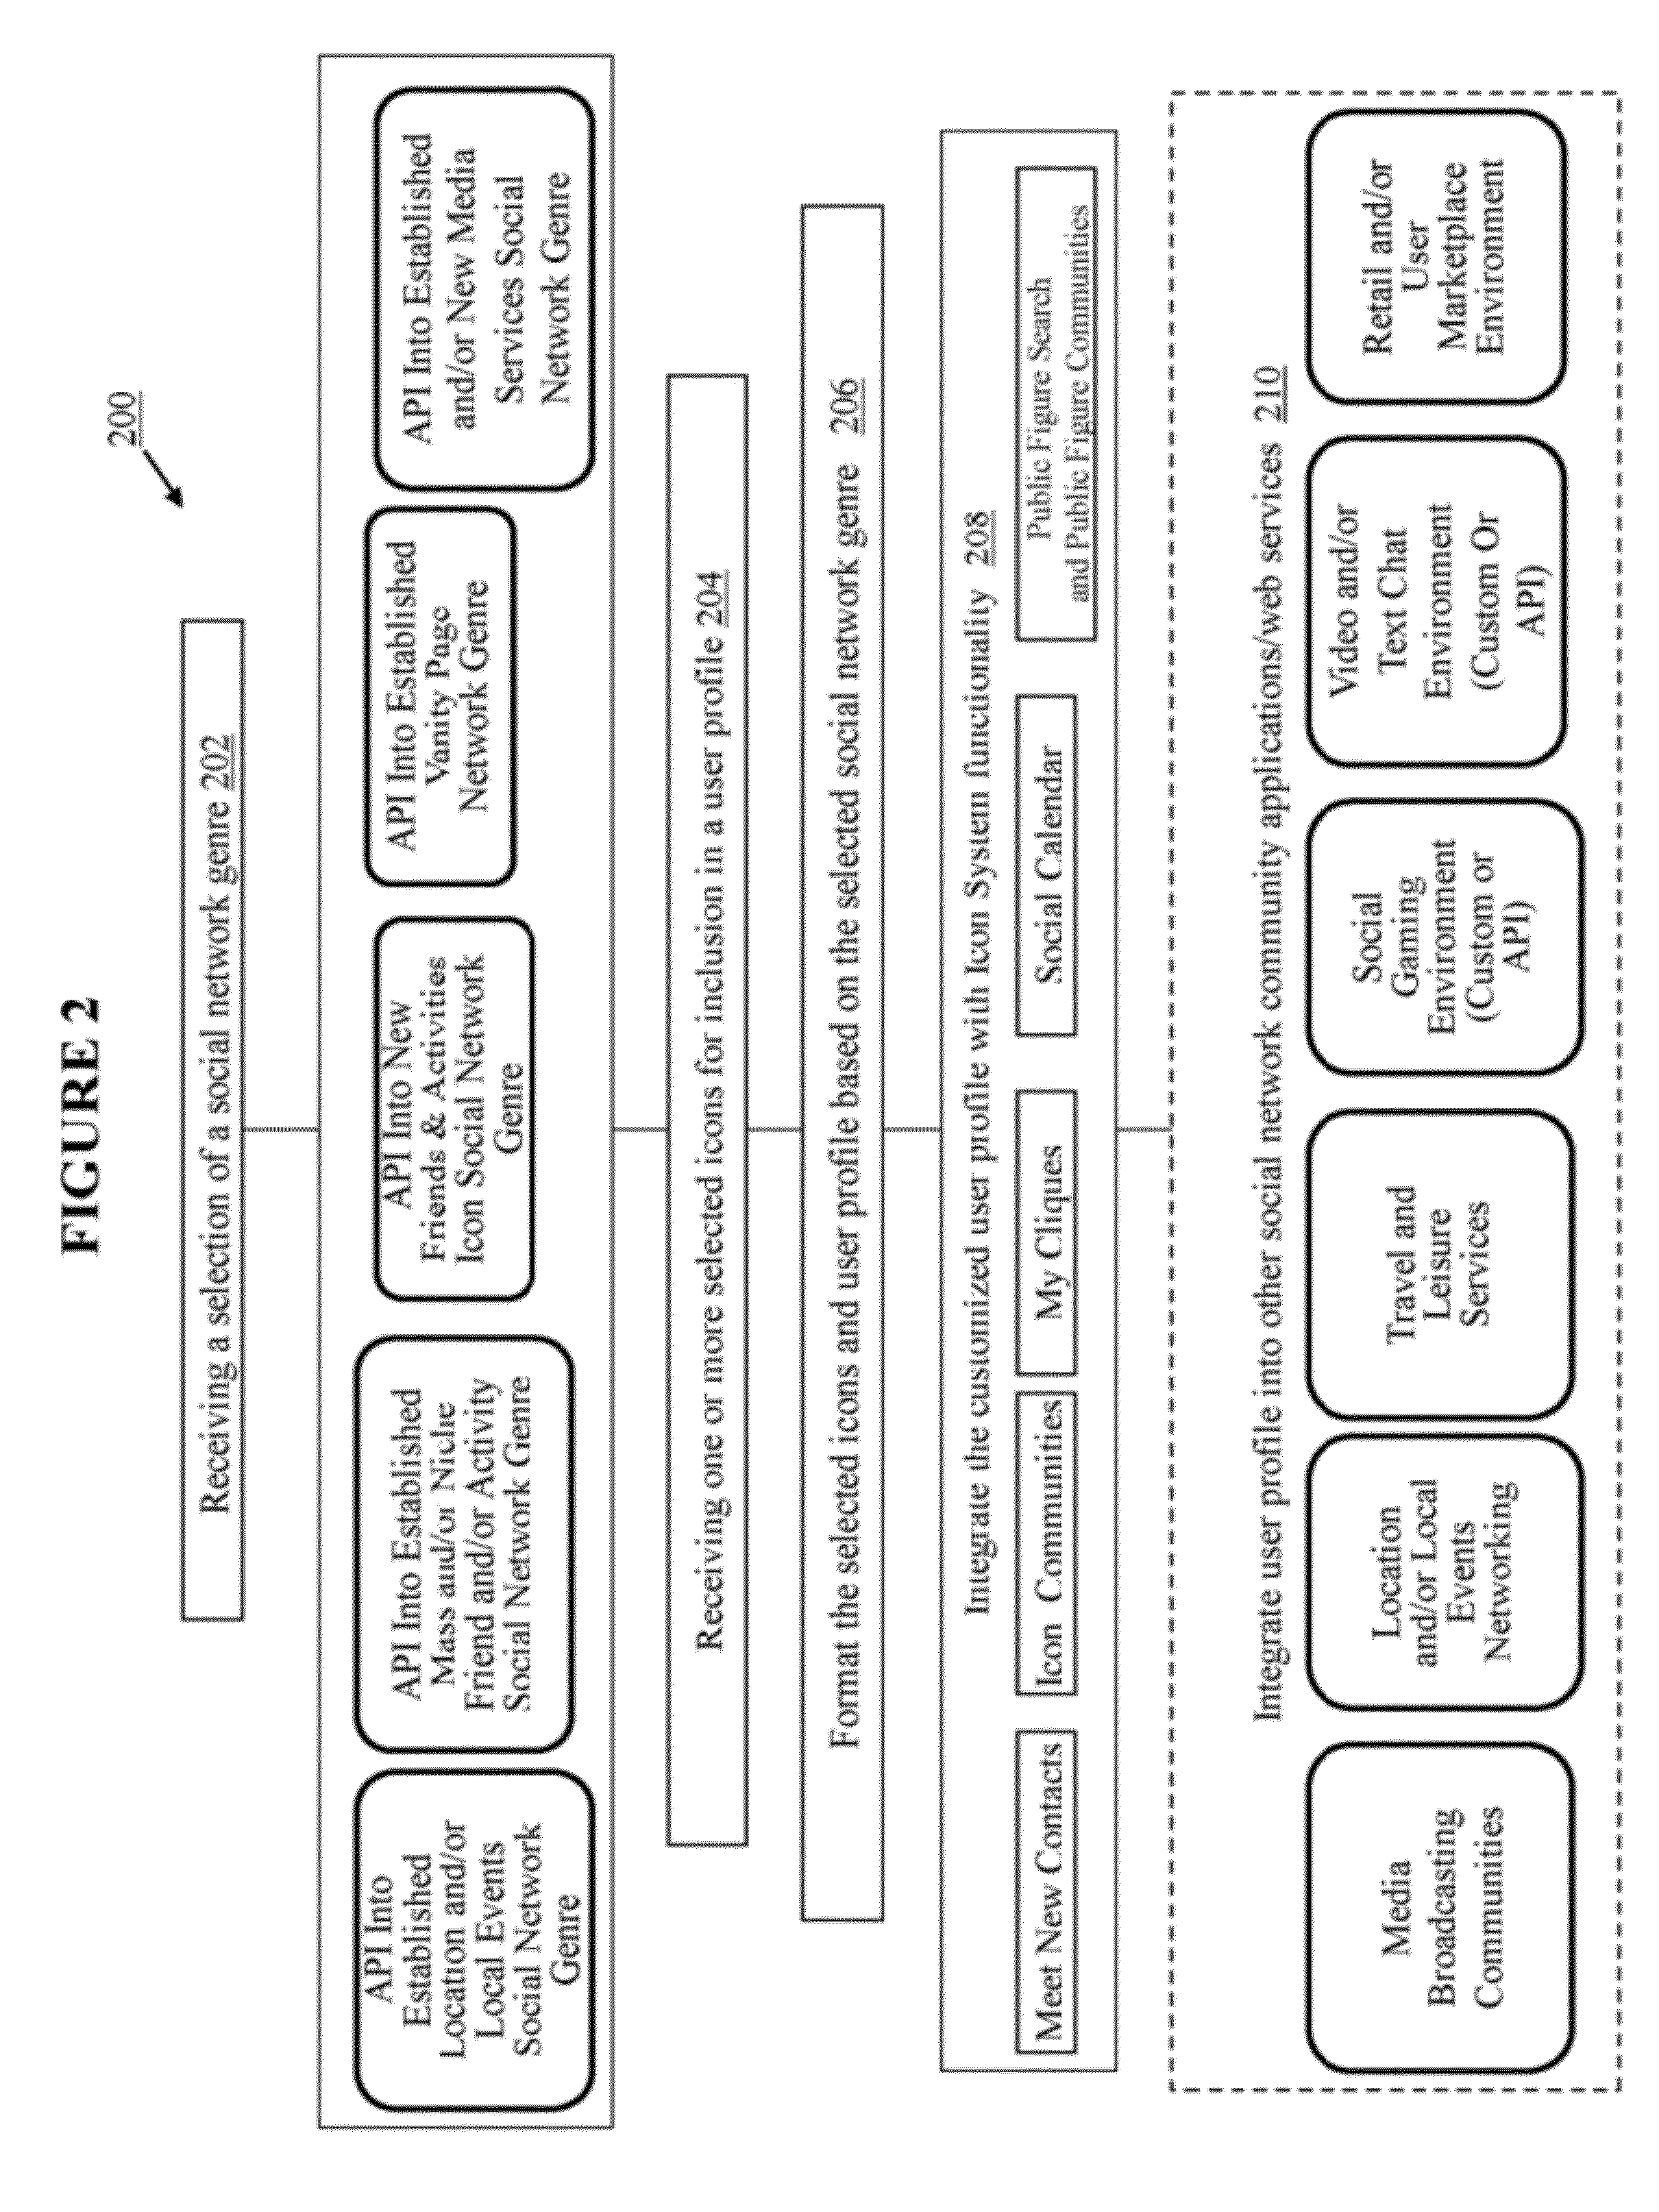 System and method for an interactive mobile-optimized icon-based profile display and associated public figure social network functionality